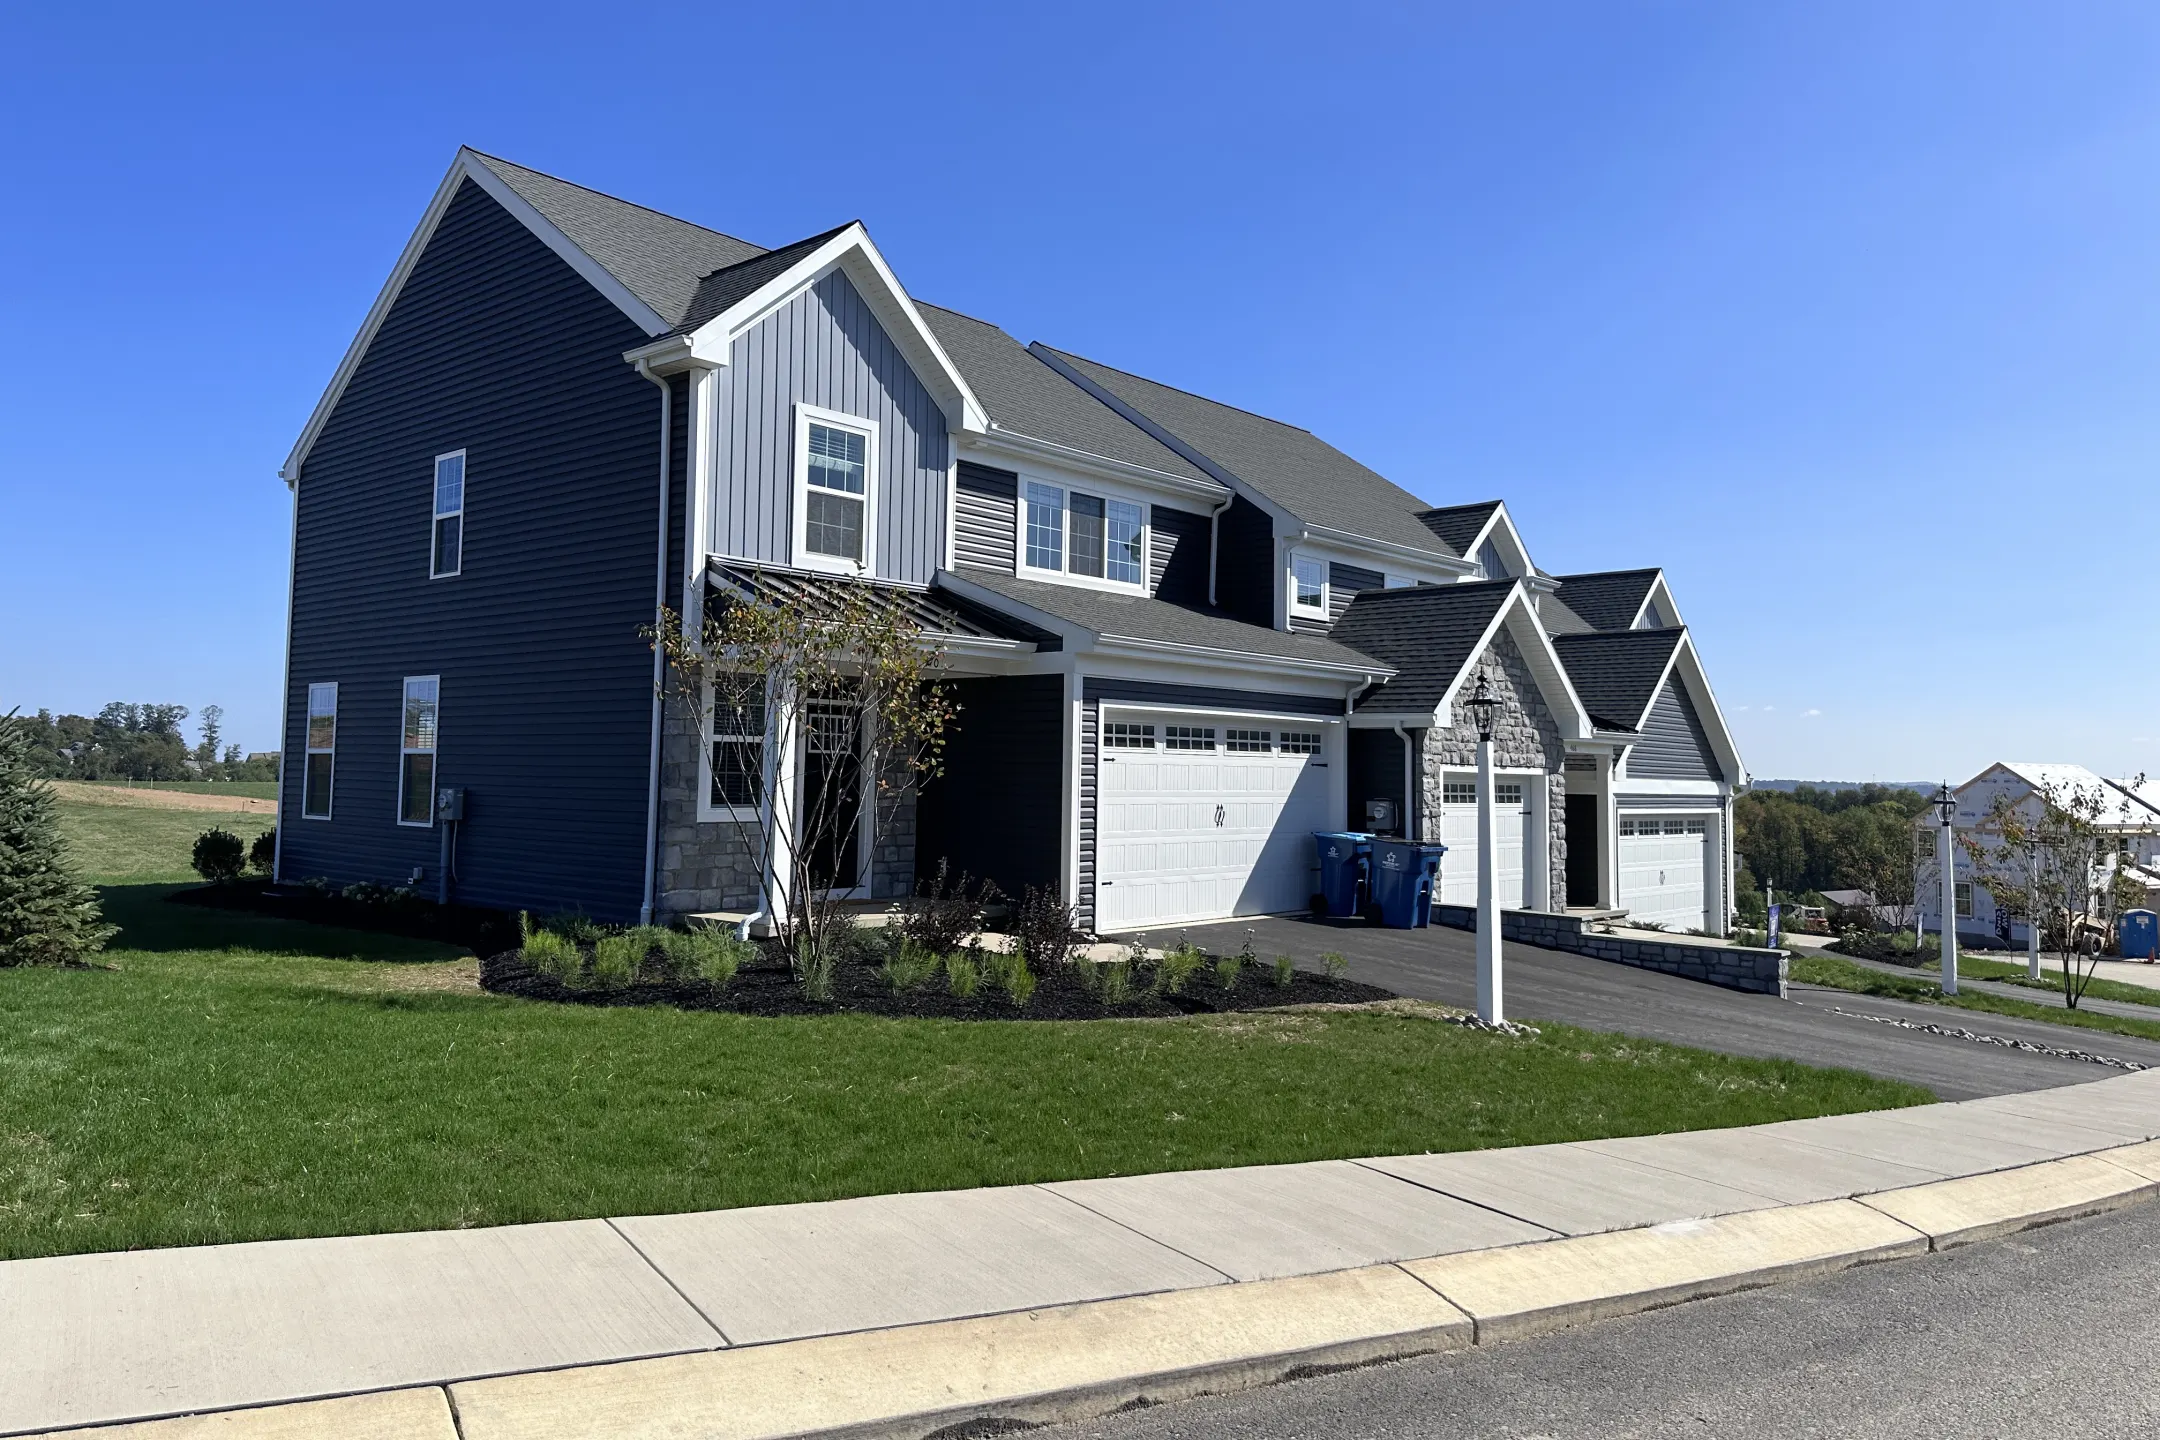 Building - River Ridge Townhomes - Wrightsville, PA